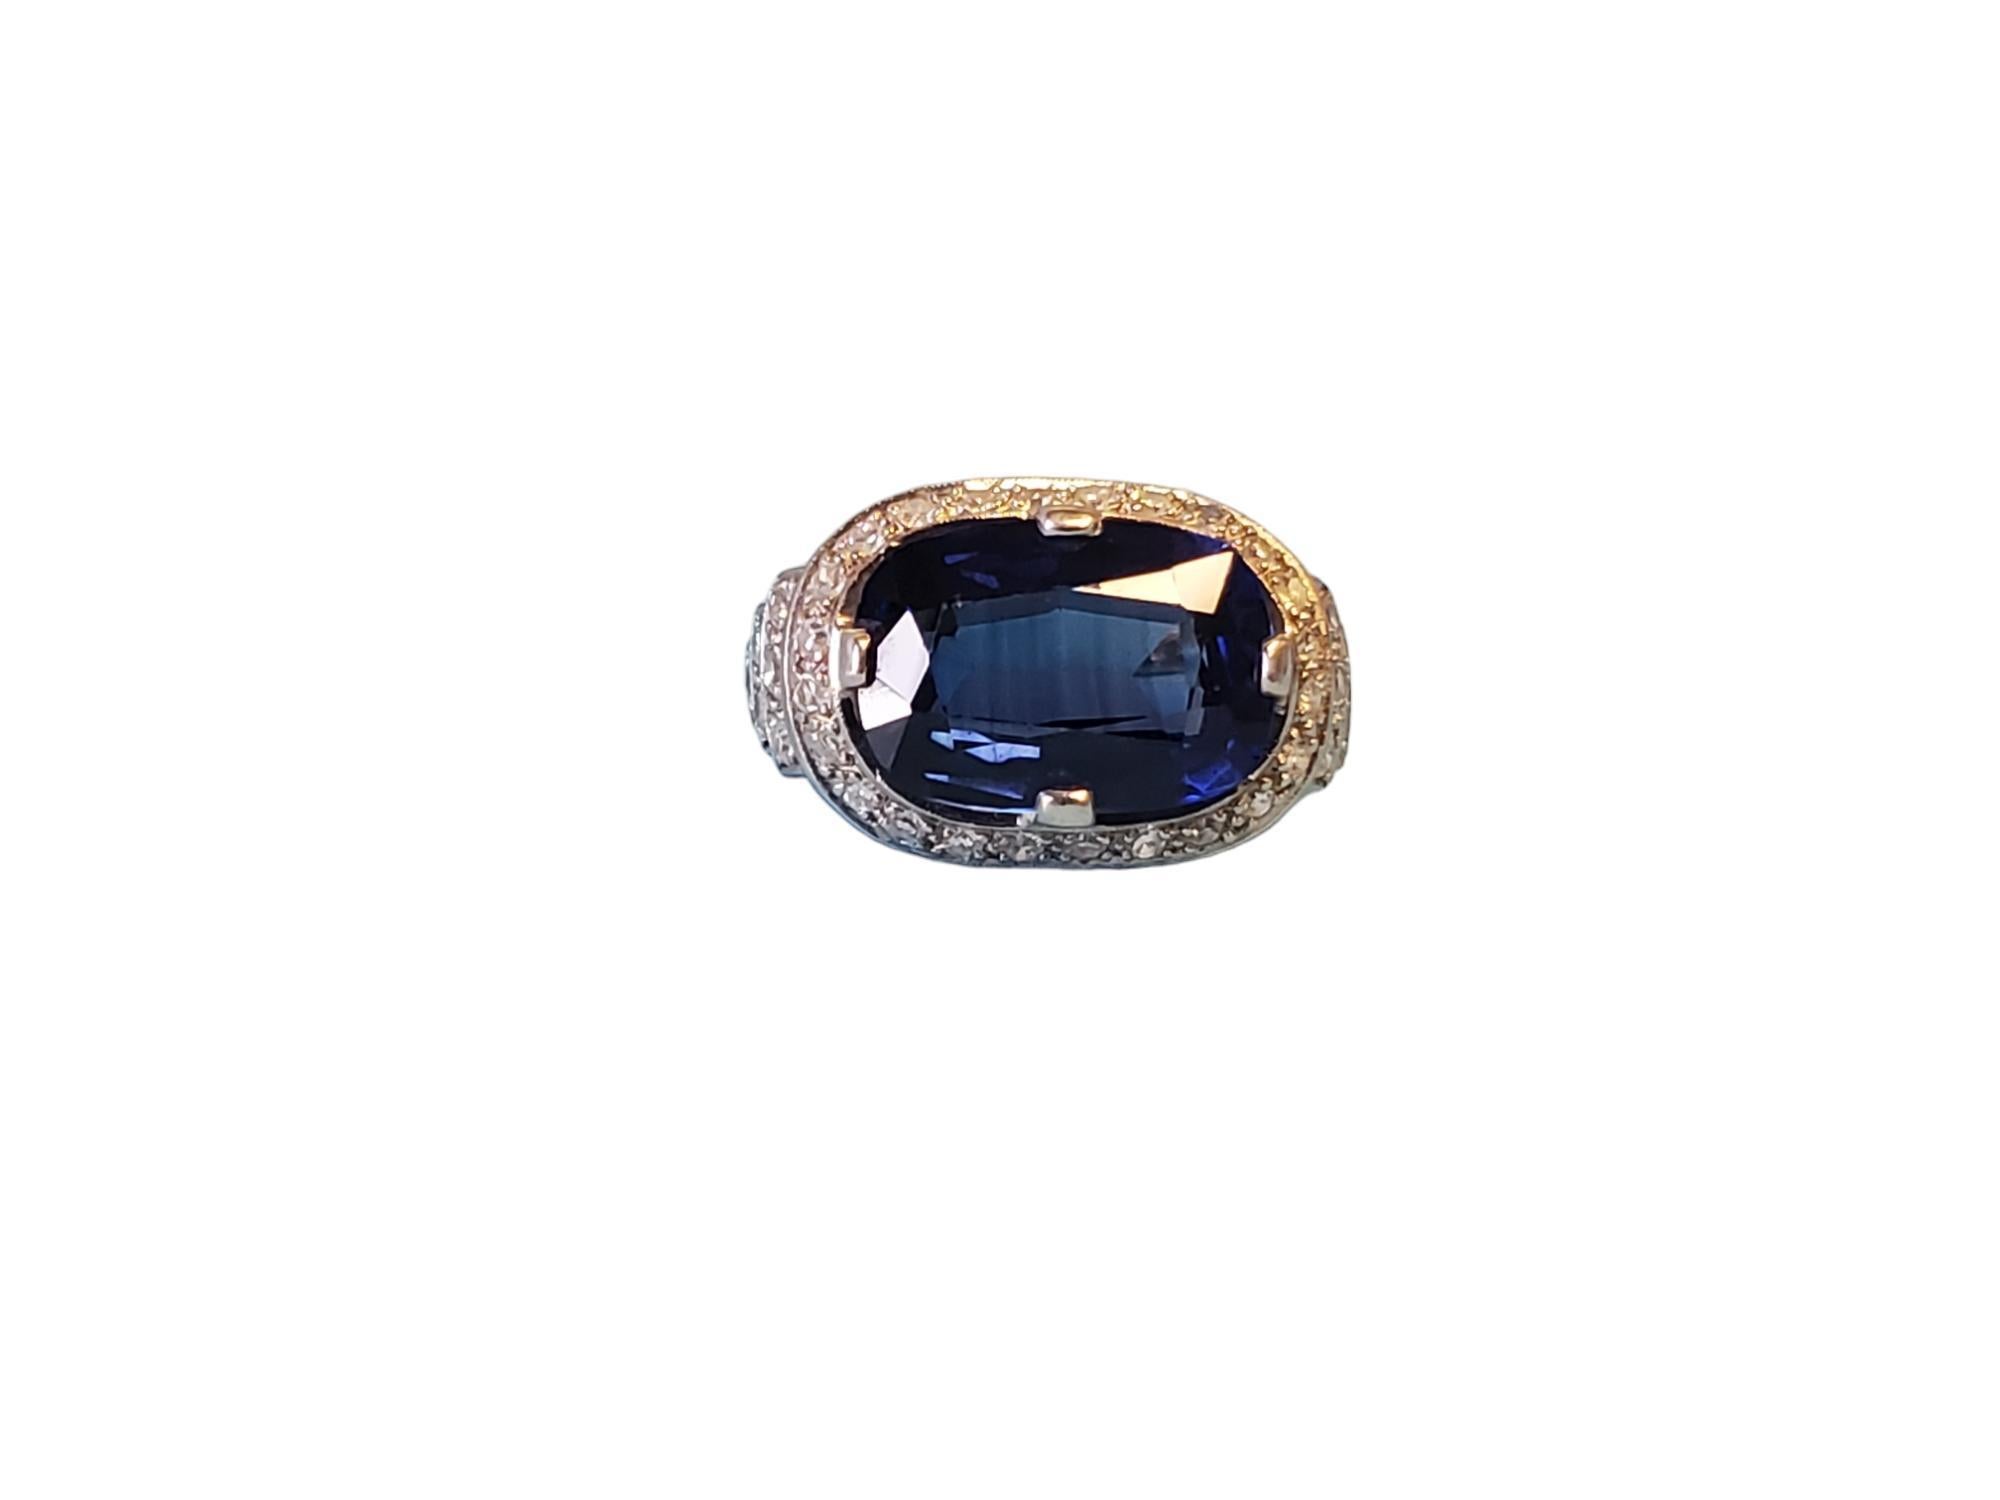 Listed is a gorgeous art deco plat and diamond mount with a pretty oval blue sapphire. The ring is hand crafted and features white single cut diamond around the center stone and on the shank for an approximately .36tcw.  Size 6.75, this ring is in